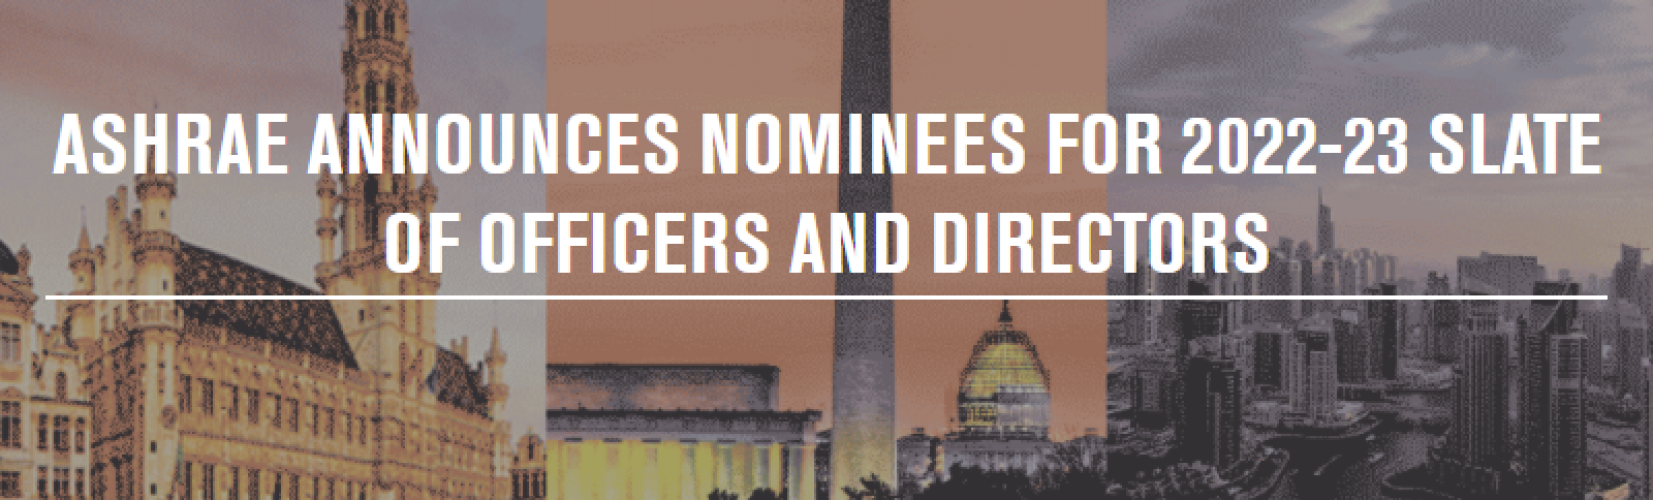 ashrae-announces-nominees-for-2022-23-slate-of-officers-and-directors